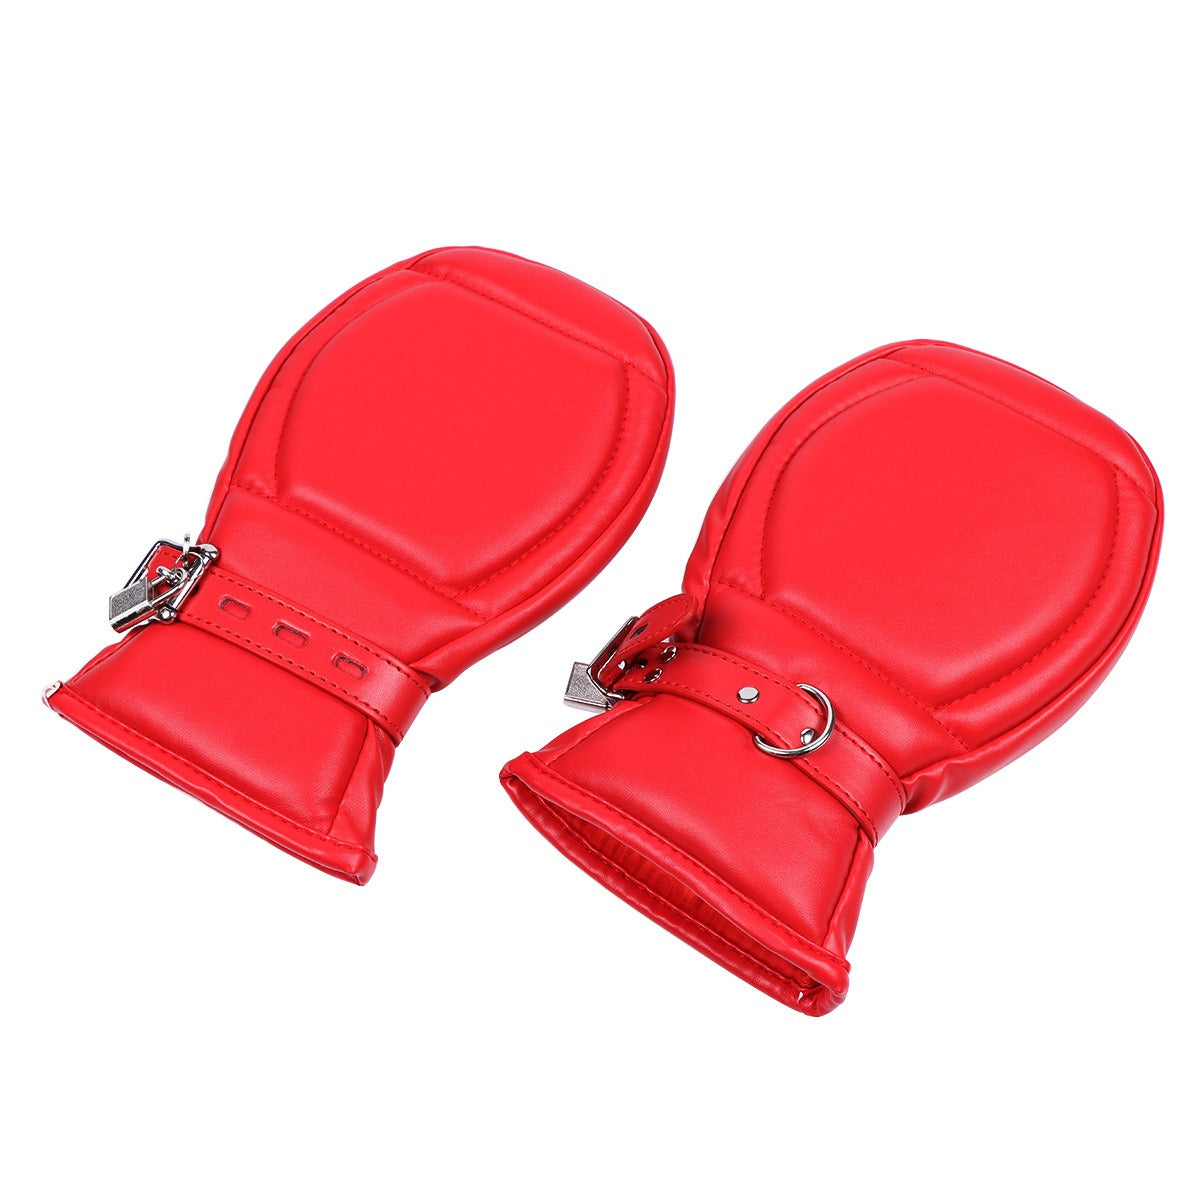 PADDED PUP PAW LOCKABLE MITTS - Red - Pup Hood UK